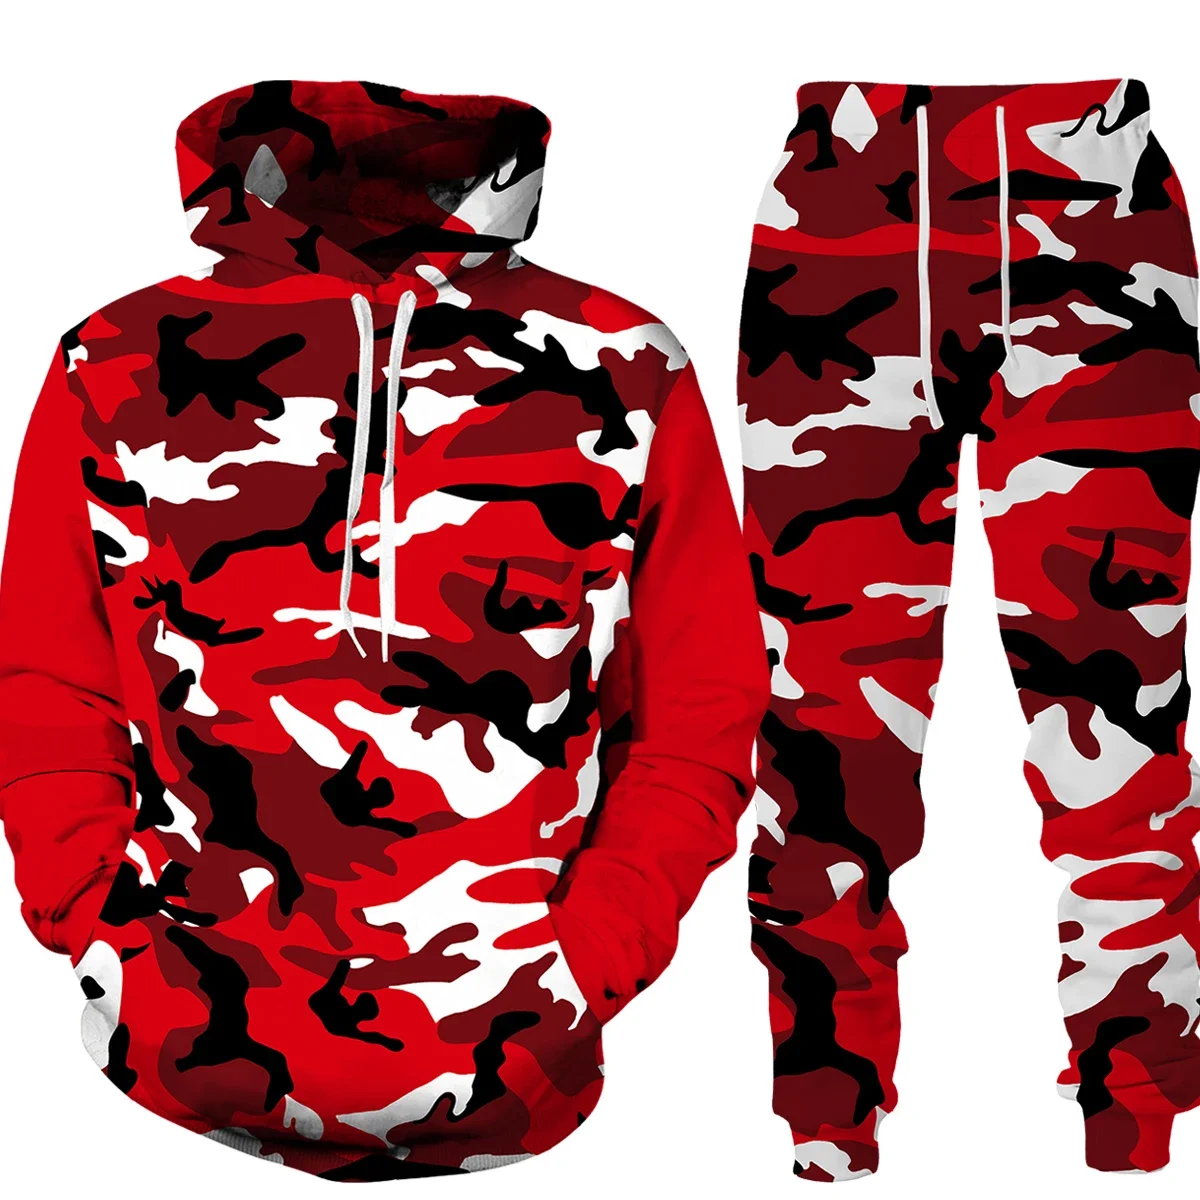 Men Camouflage Printing Hoodies Set Fashion Tracksuit 2 Pieces Sweatshirt Sweatpants Suit Casual Clothing Male Autumn Outfit